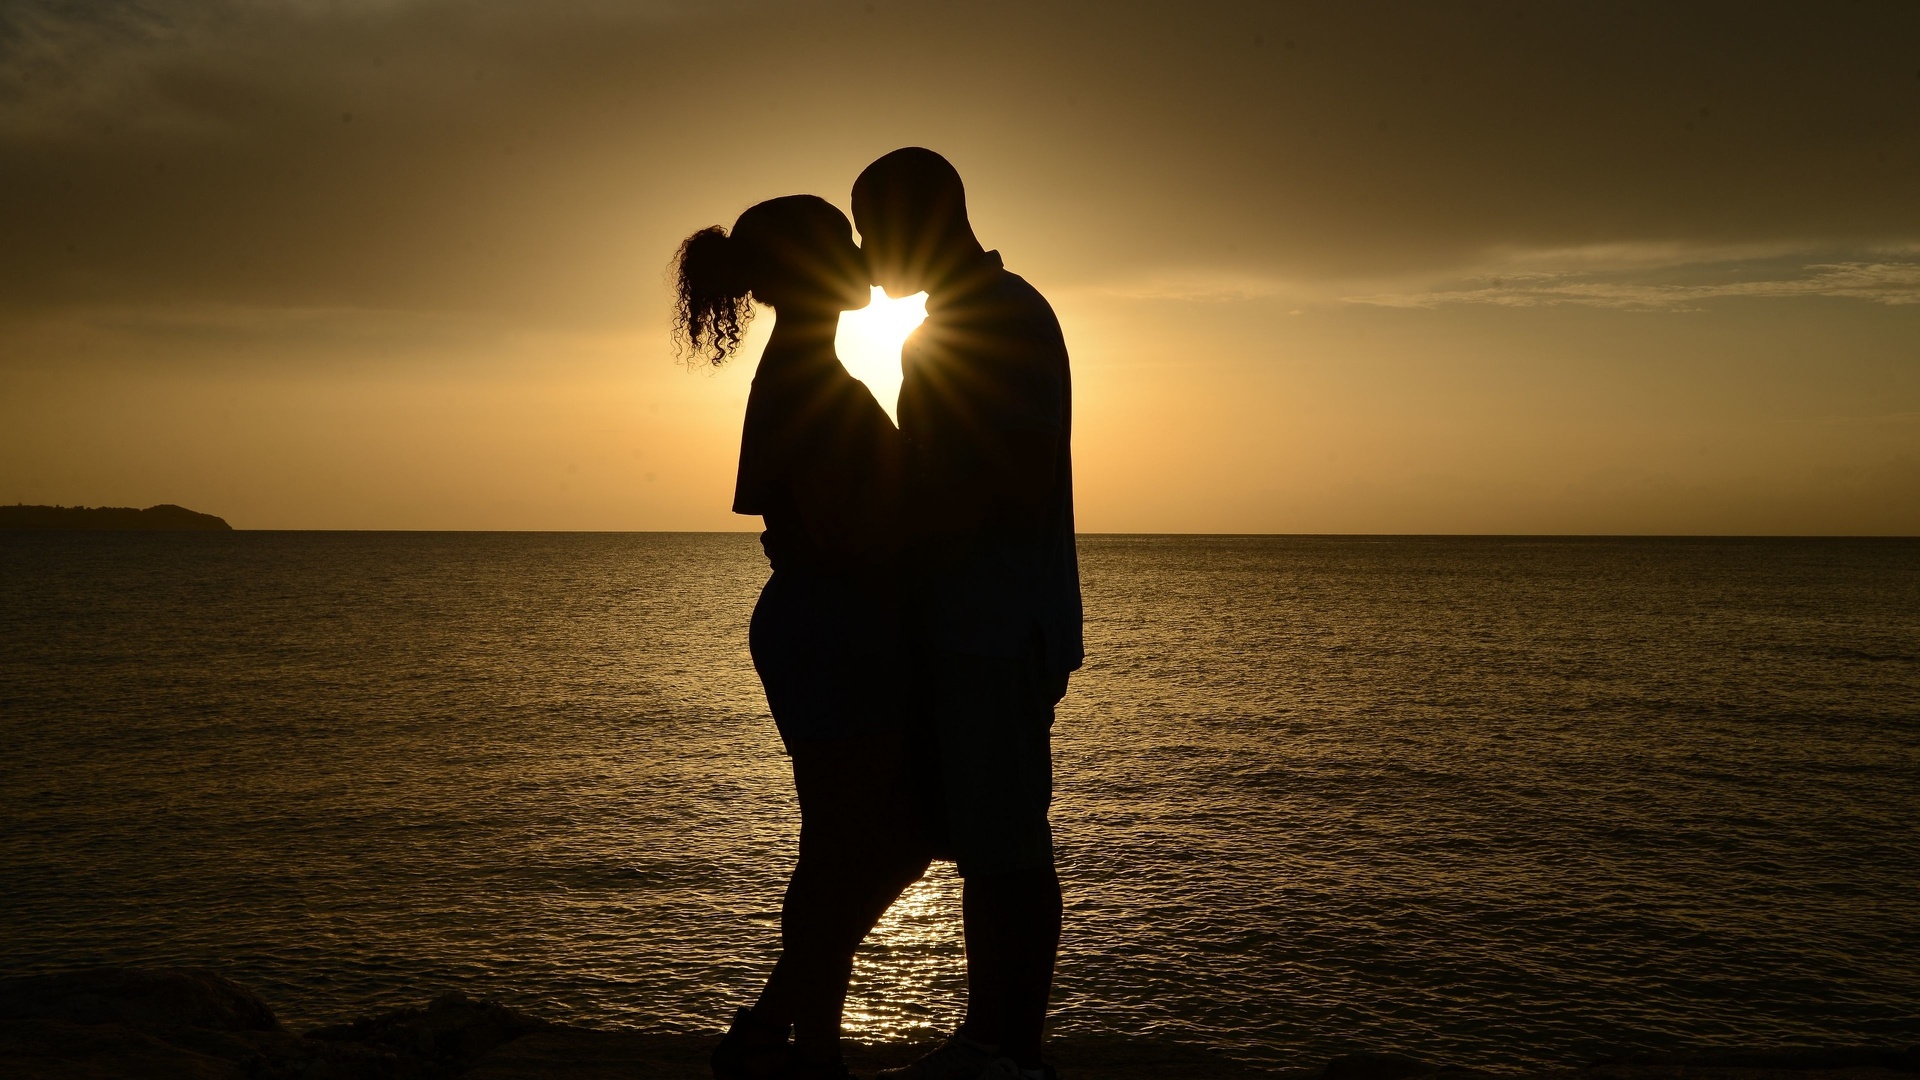 Couple amour - photographie.jpg